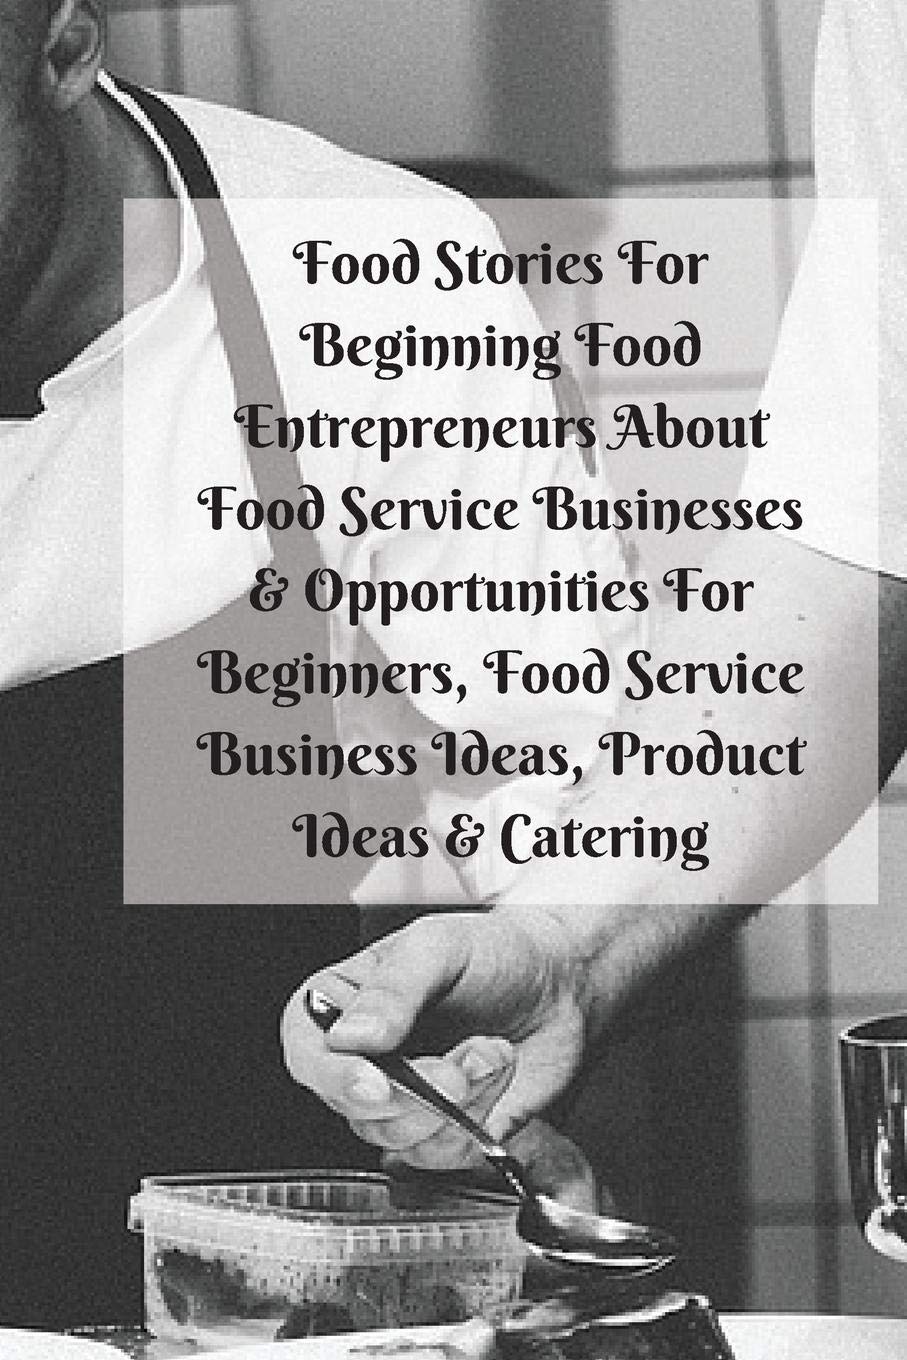 Food Stories For Beginning Food Entrepreneurs About Food Service Businesses & Opportunities For Beginners, Food Service Business Ideas, Product Ideas - SureShot Books Publishing LLC